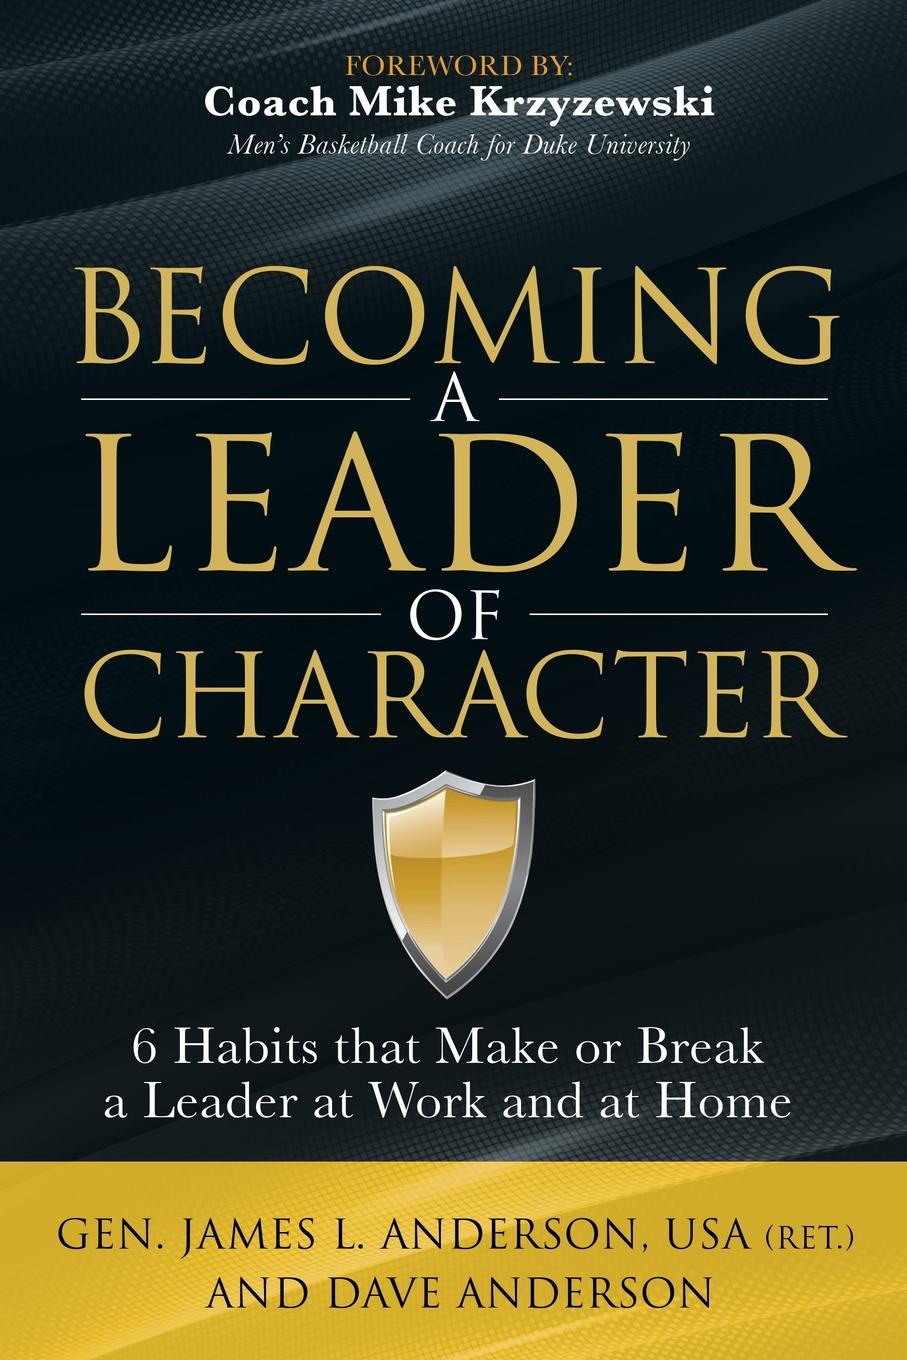 Becoming a Leader of Character. 6 Habits That Make or Break a Leader at Work and at Home